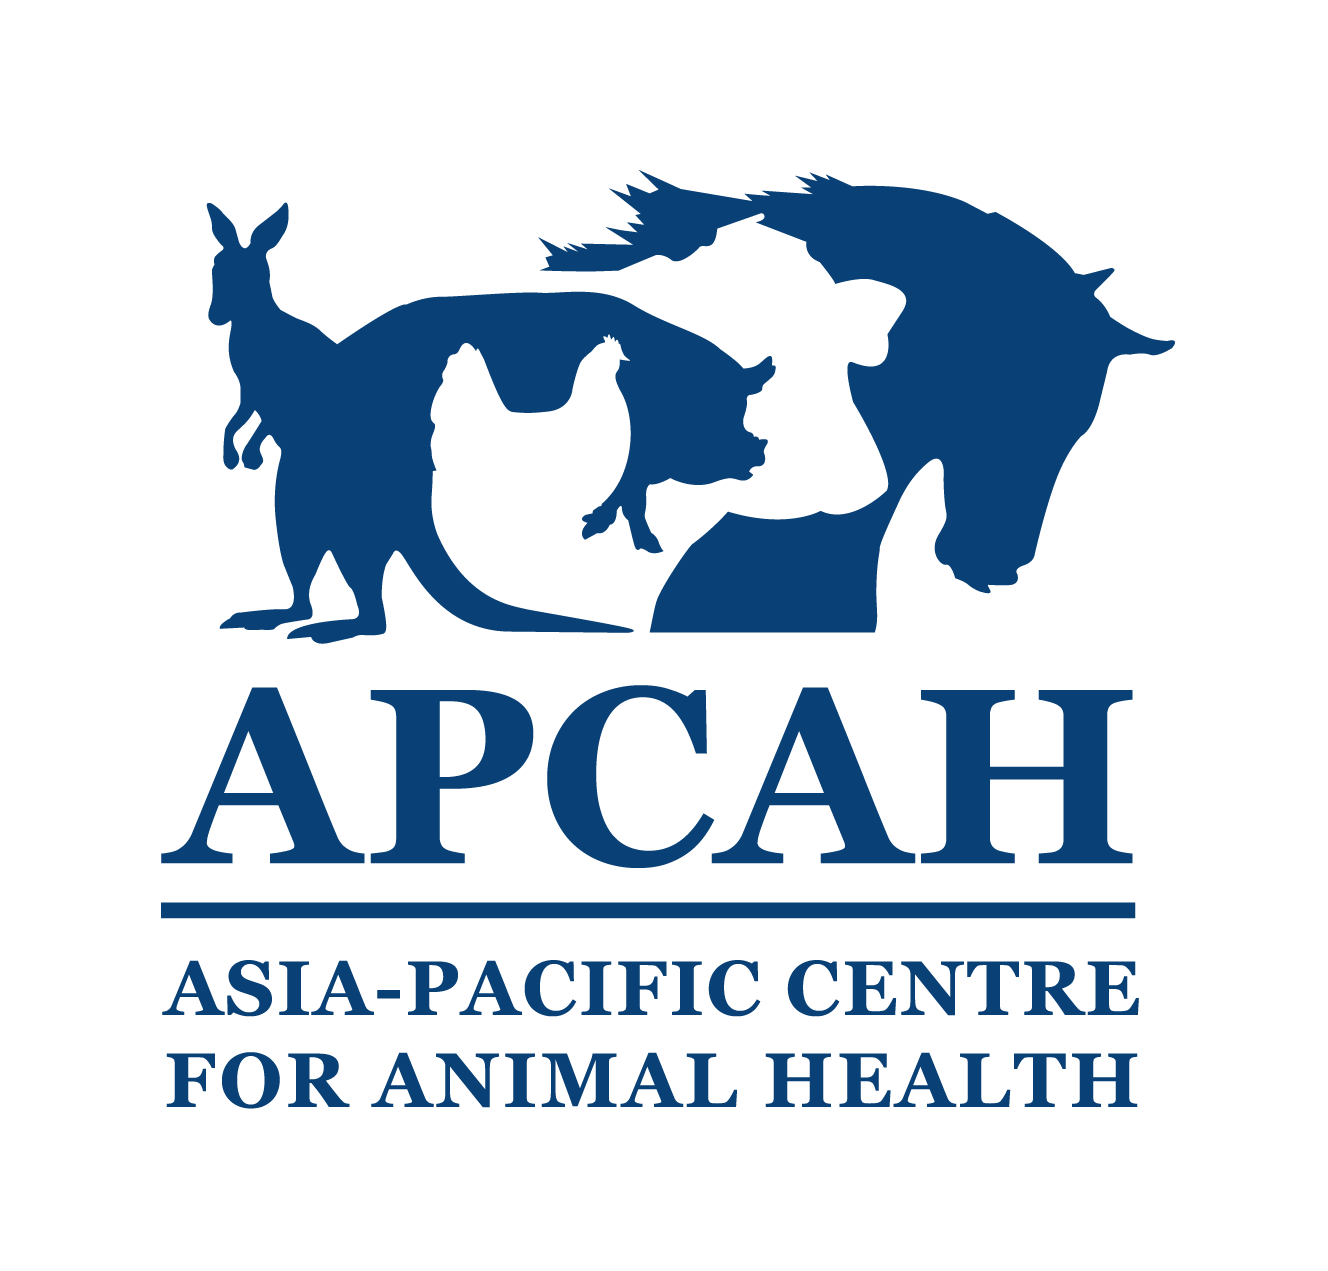 ASIA-PACIFIC CENTRE FOR ANIMAL HEALTH